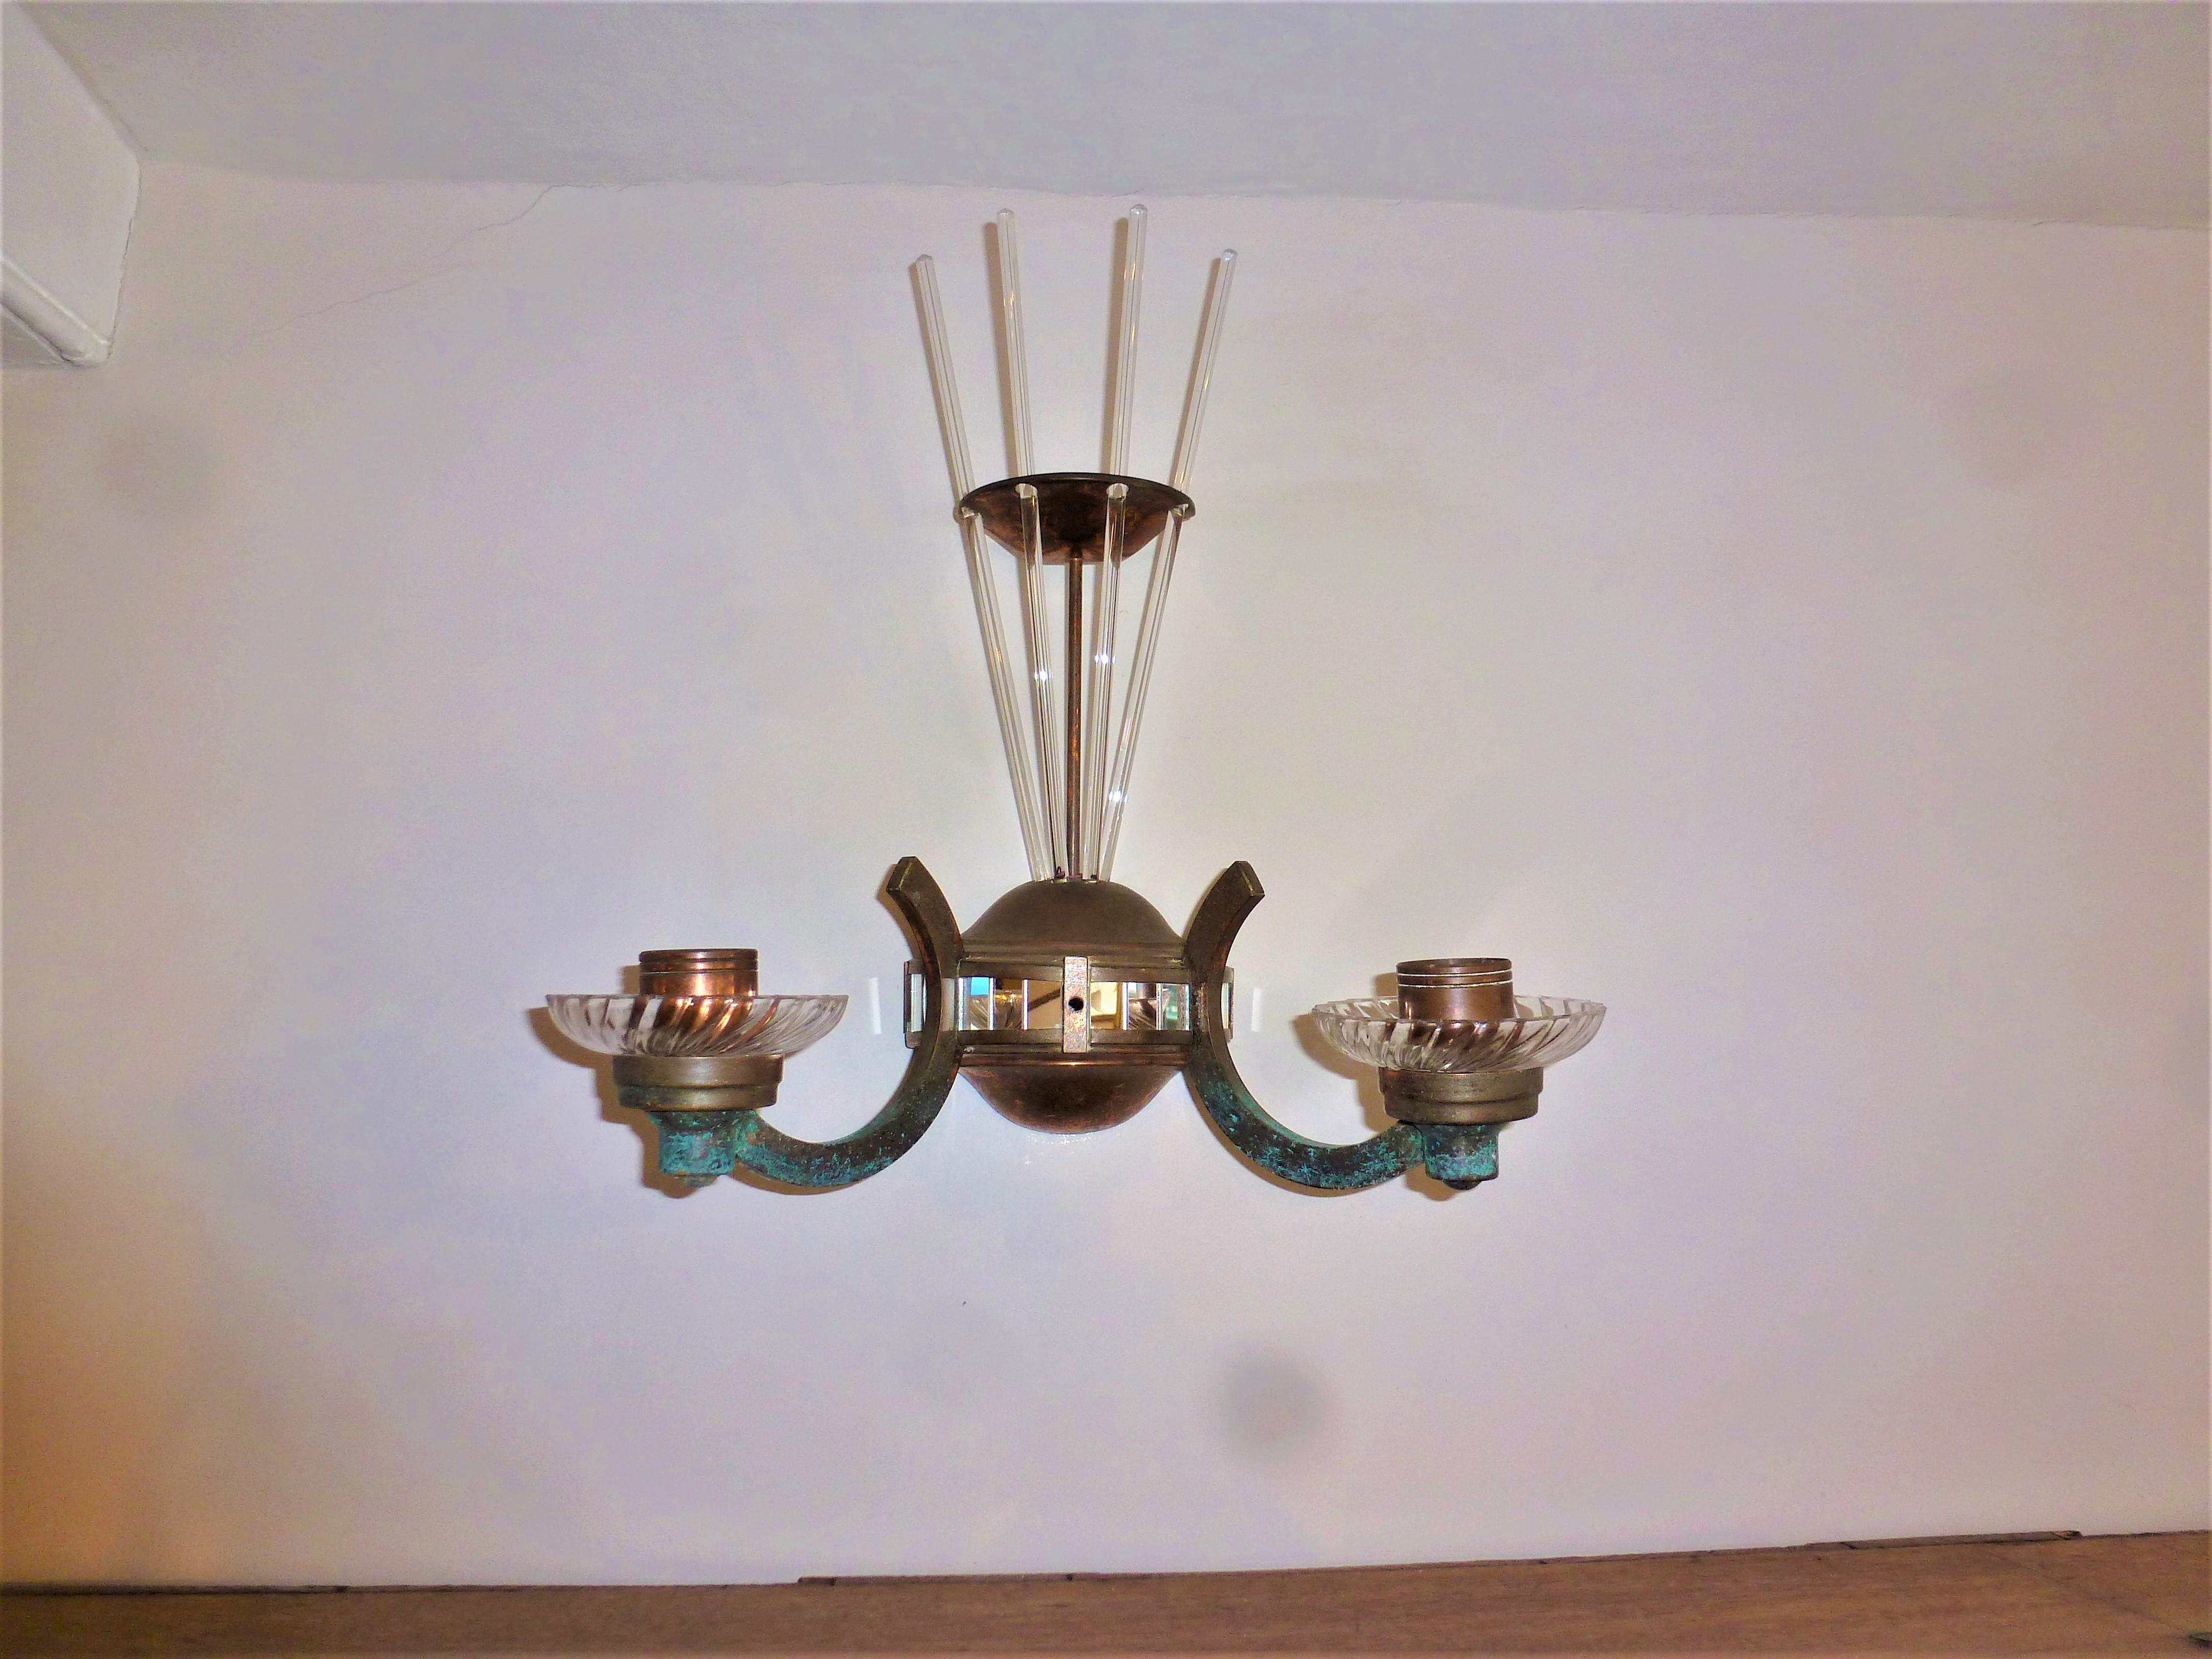 Pair of French Art Deco 1930 Copper Mosaic Glass Wall Scone Lights Lighting For Sale 2